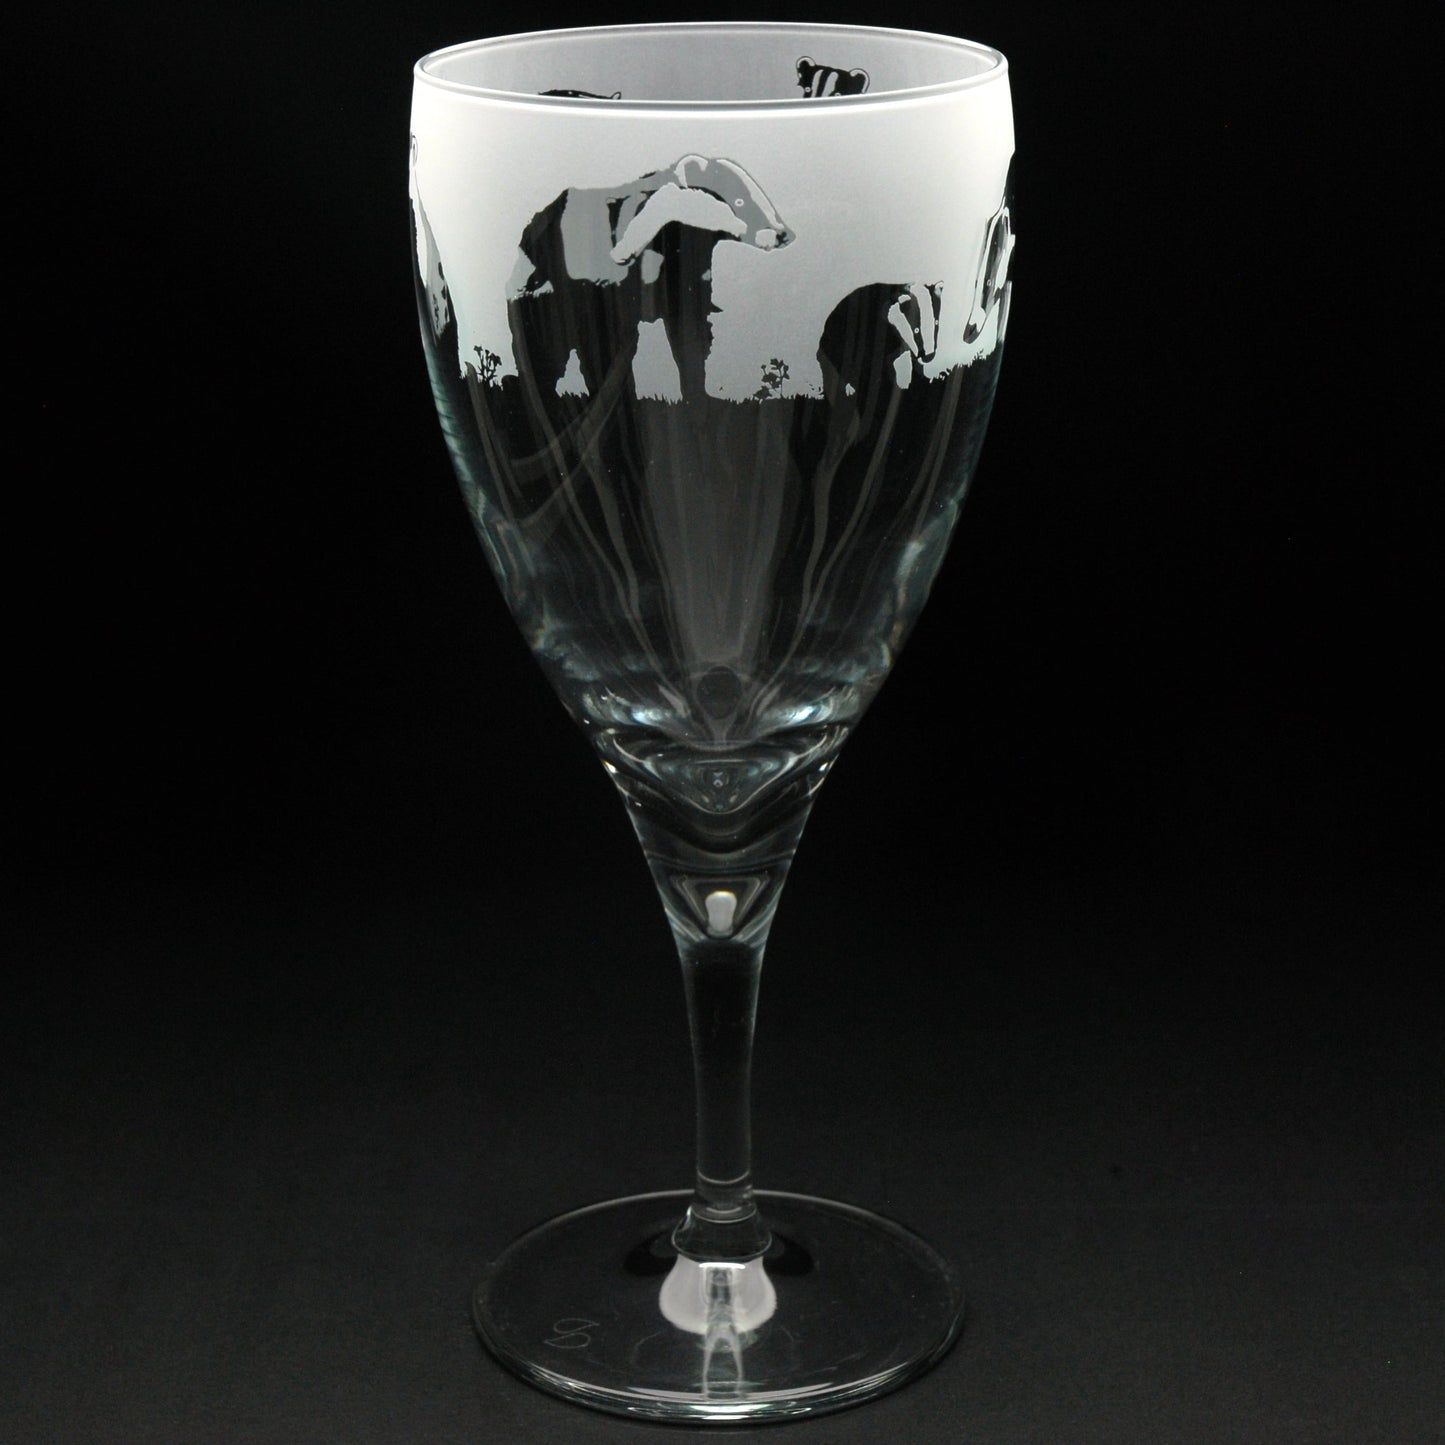 Badger Crystal Wine Glass - Hand Etched/Engraved Gift